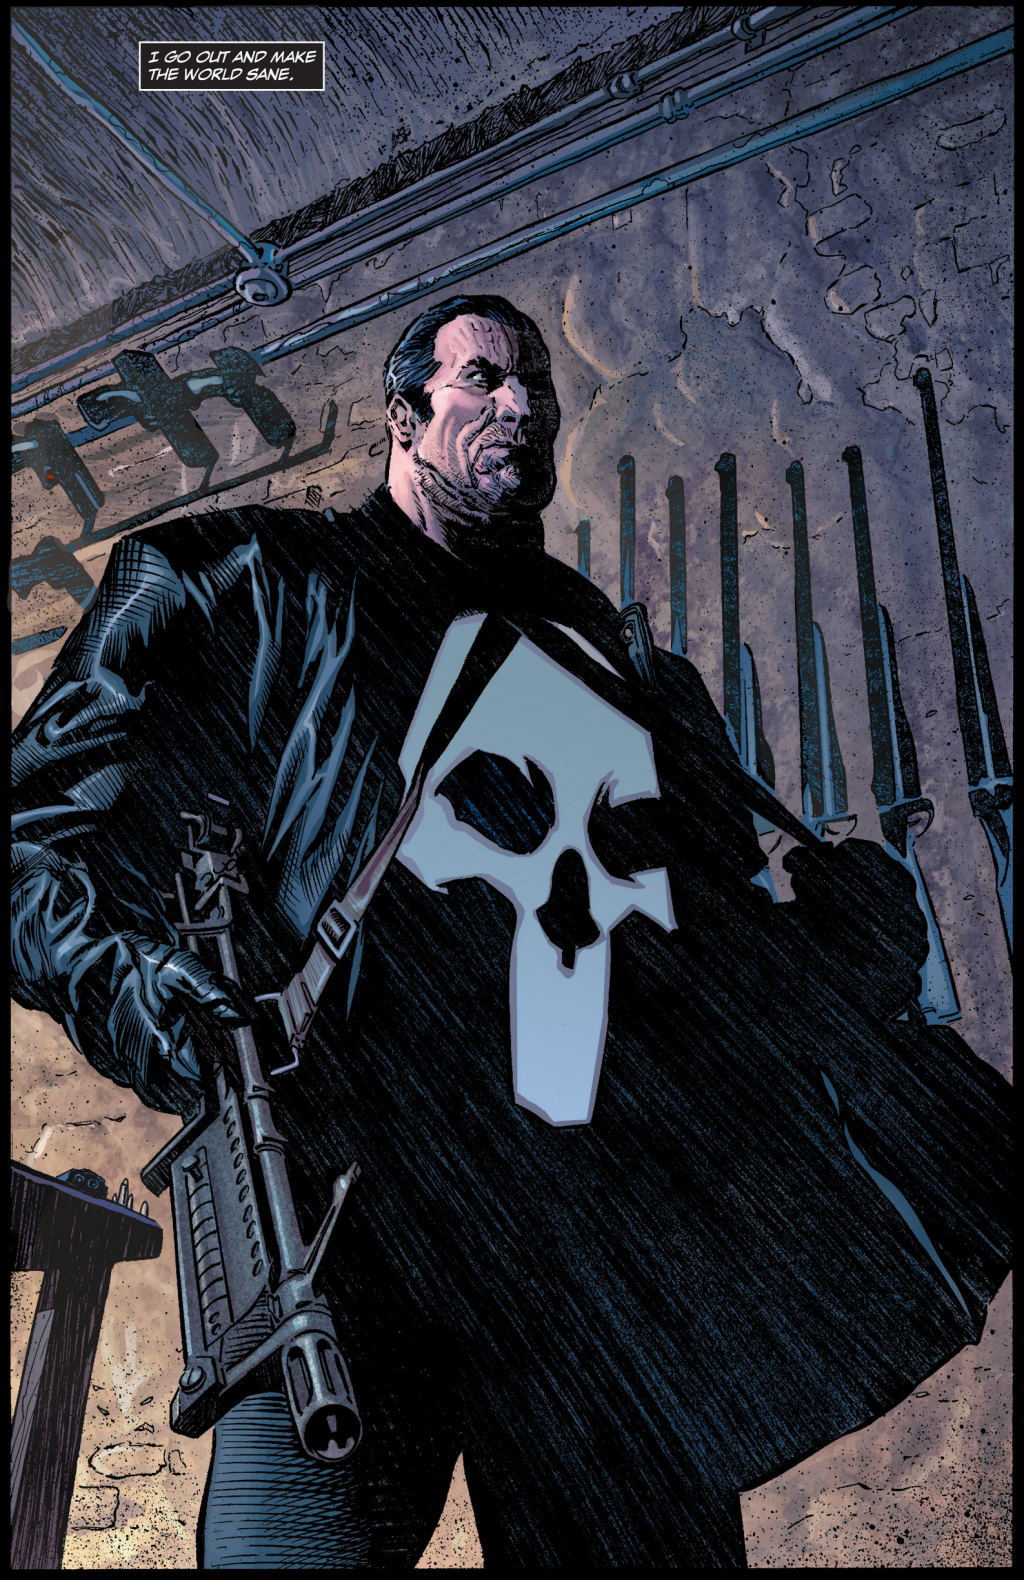 Frank Castle is back in action in The Punisher Vol. 7 #1 "In the Beginning, Part One" (2004), Marvel Comics. Words by Garth Ennis, art by Lewis LaRosa, Tom Palmer, Dean White, and Randy Gentile.